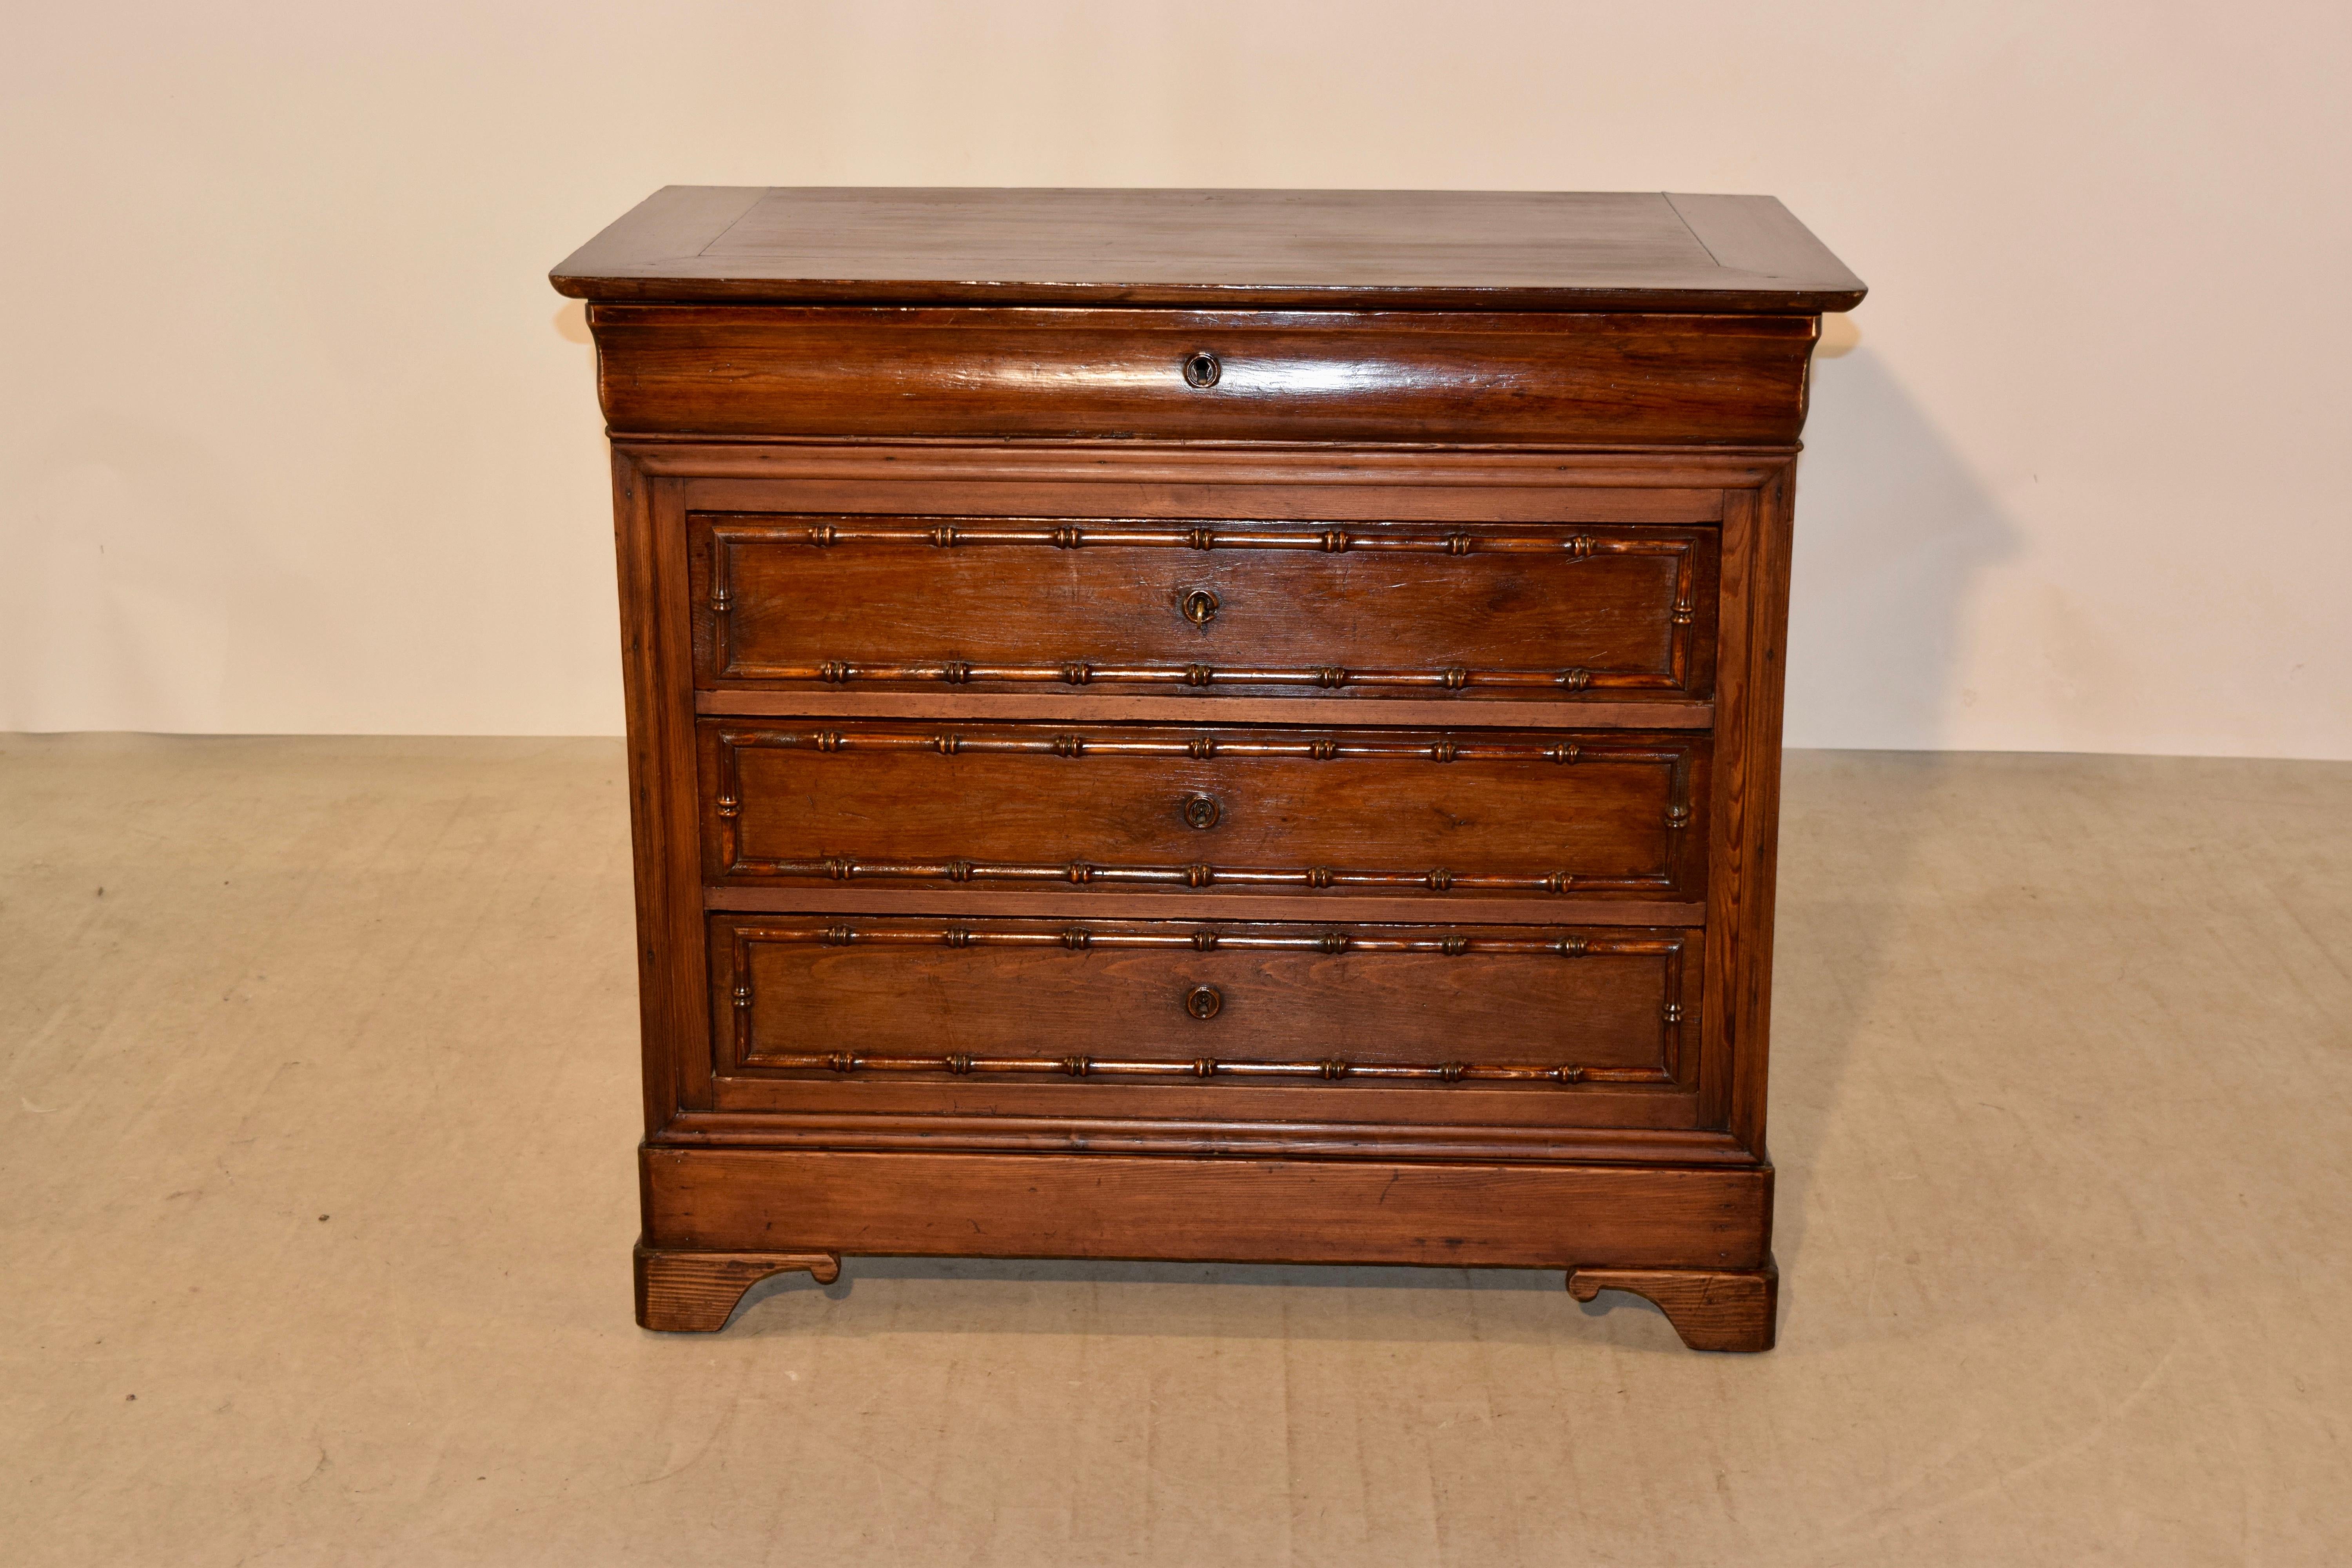 19th century French commode made from pitch pine and cherry. It has a banded top following down to simple sides, which have shrinkage from age. The case has four drawers, the top one hidden in the molded apron and three others below. The lower